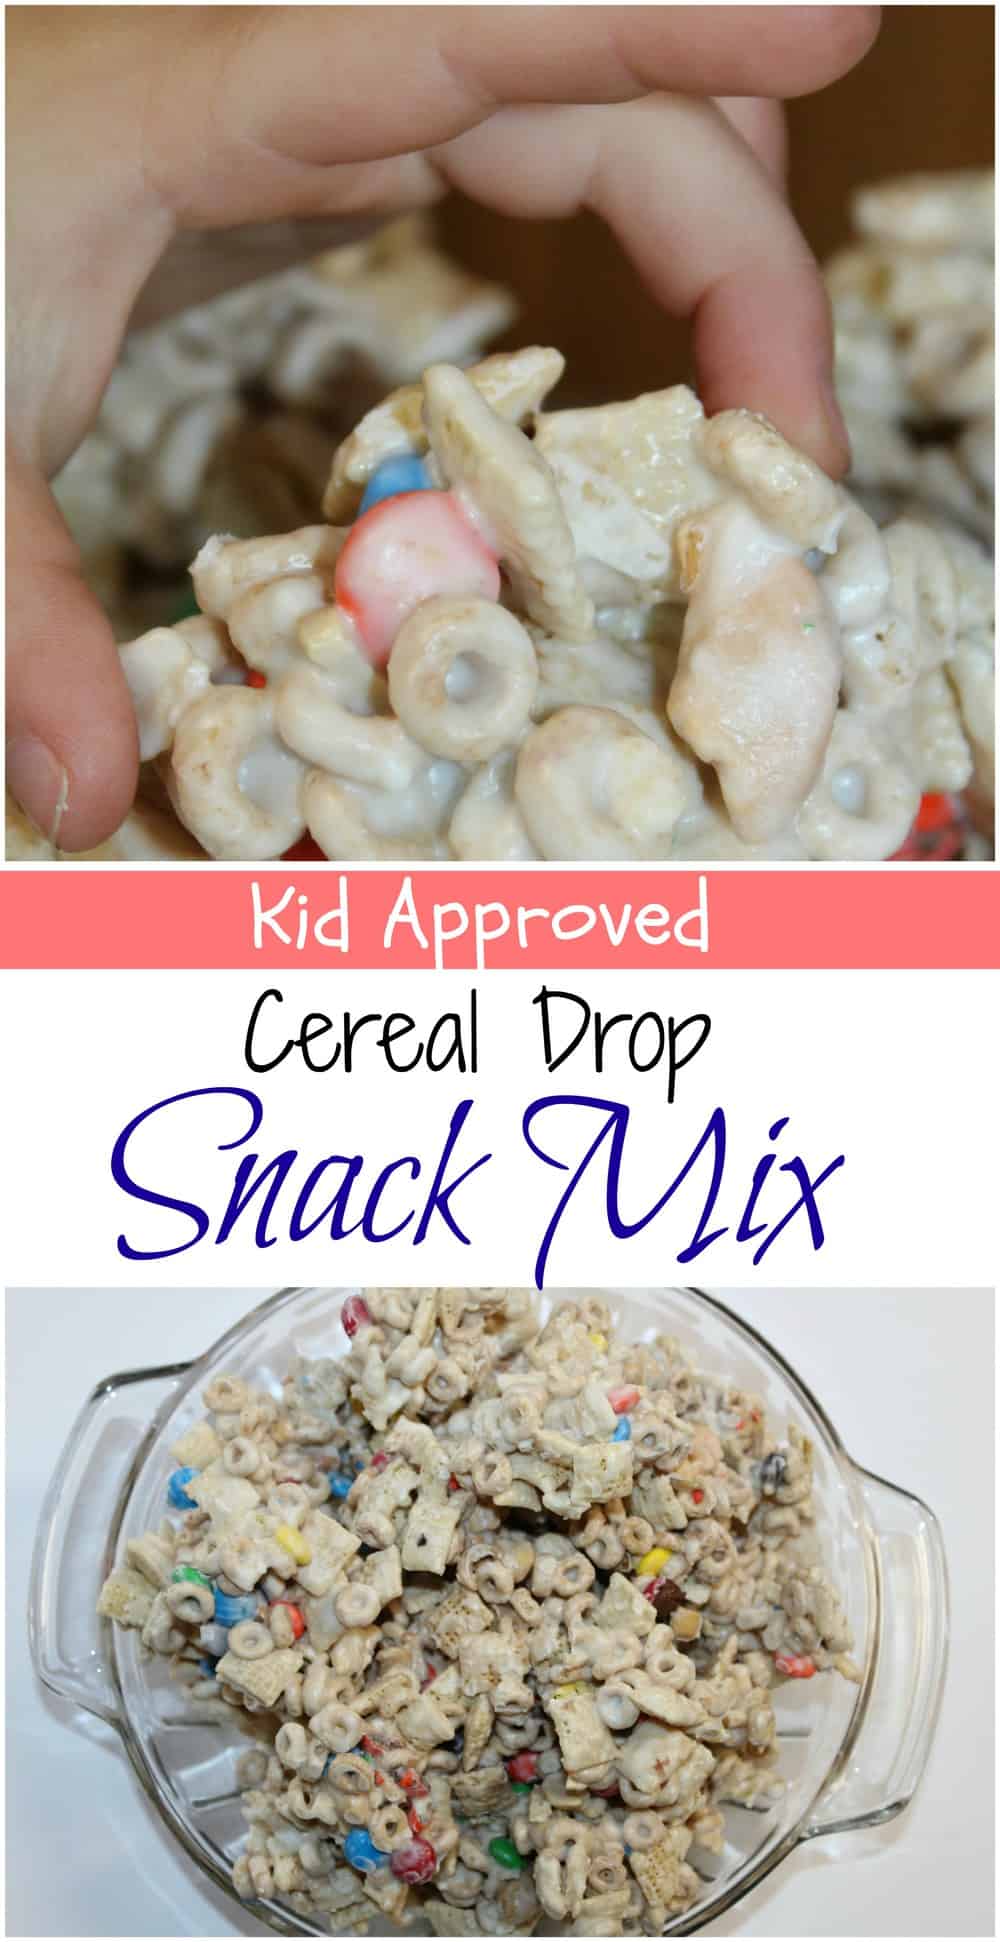 Cereal Drop Snack Mix ~ A Family Favorite! - Easy and simple ingredients, whip up this family friendly, kid-approved snack in just a few minutes! Let set, break apart, and watch everyone devour!